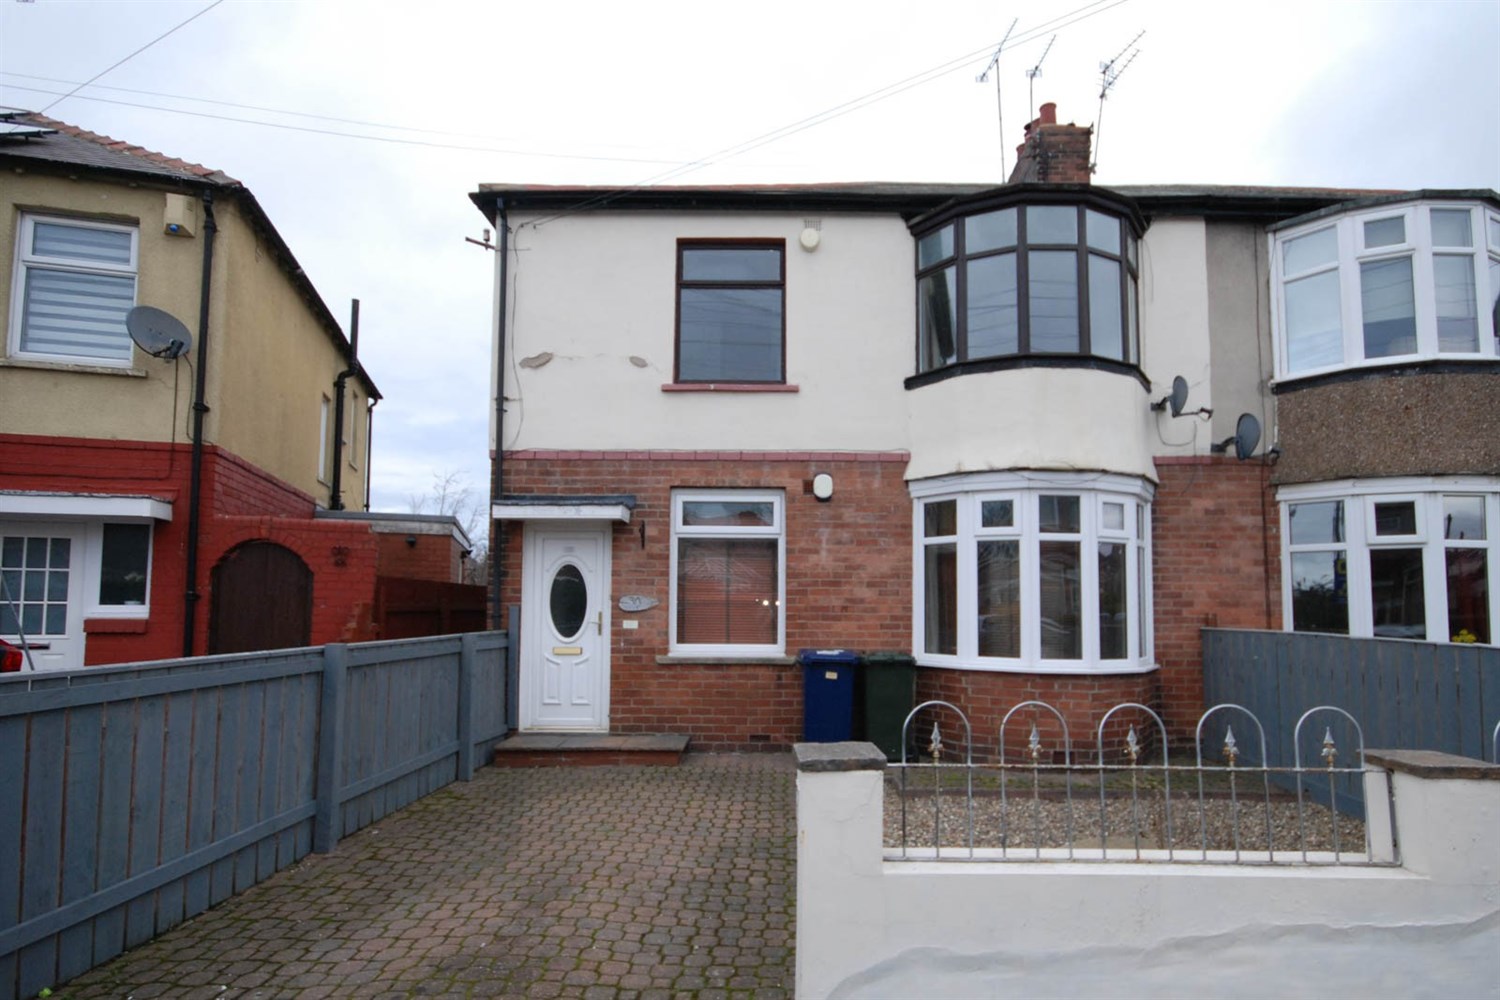 3 bed flat for sale in Willowfield Avenue, Fawdon - Property Image 1